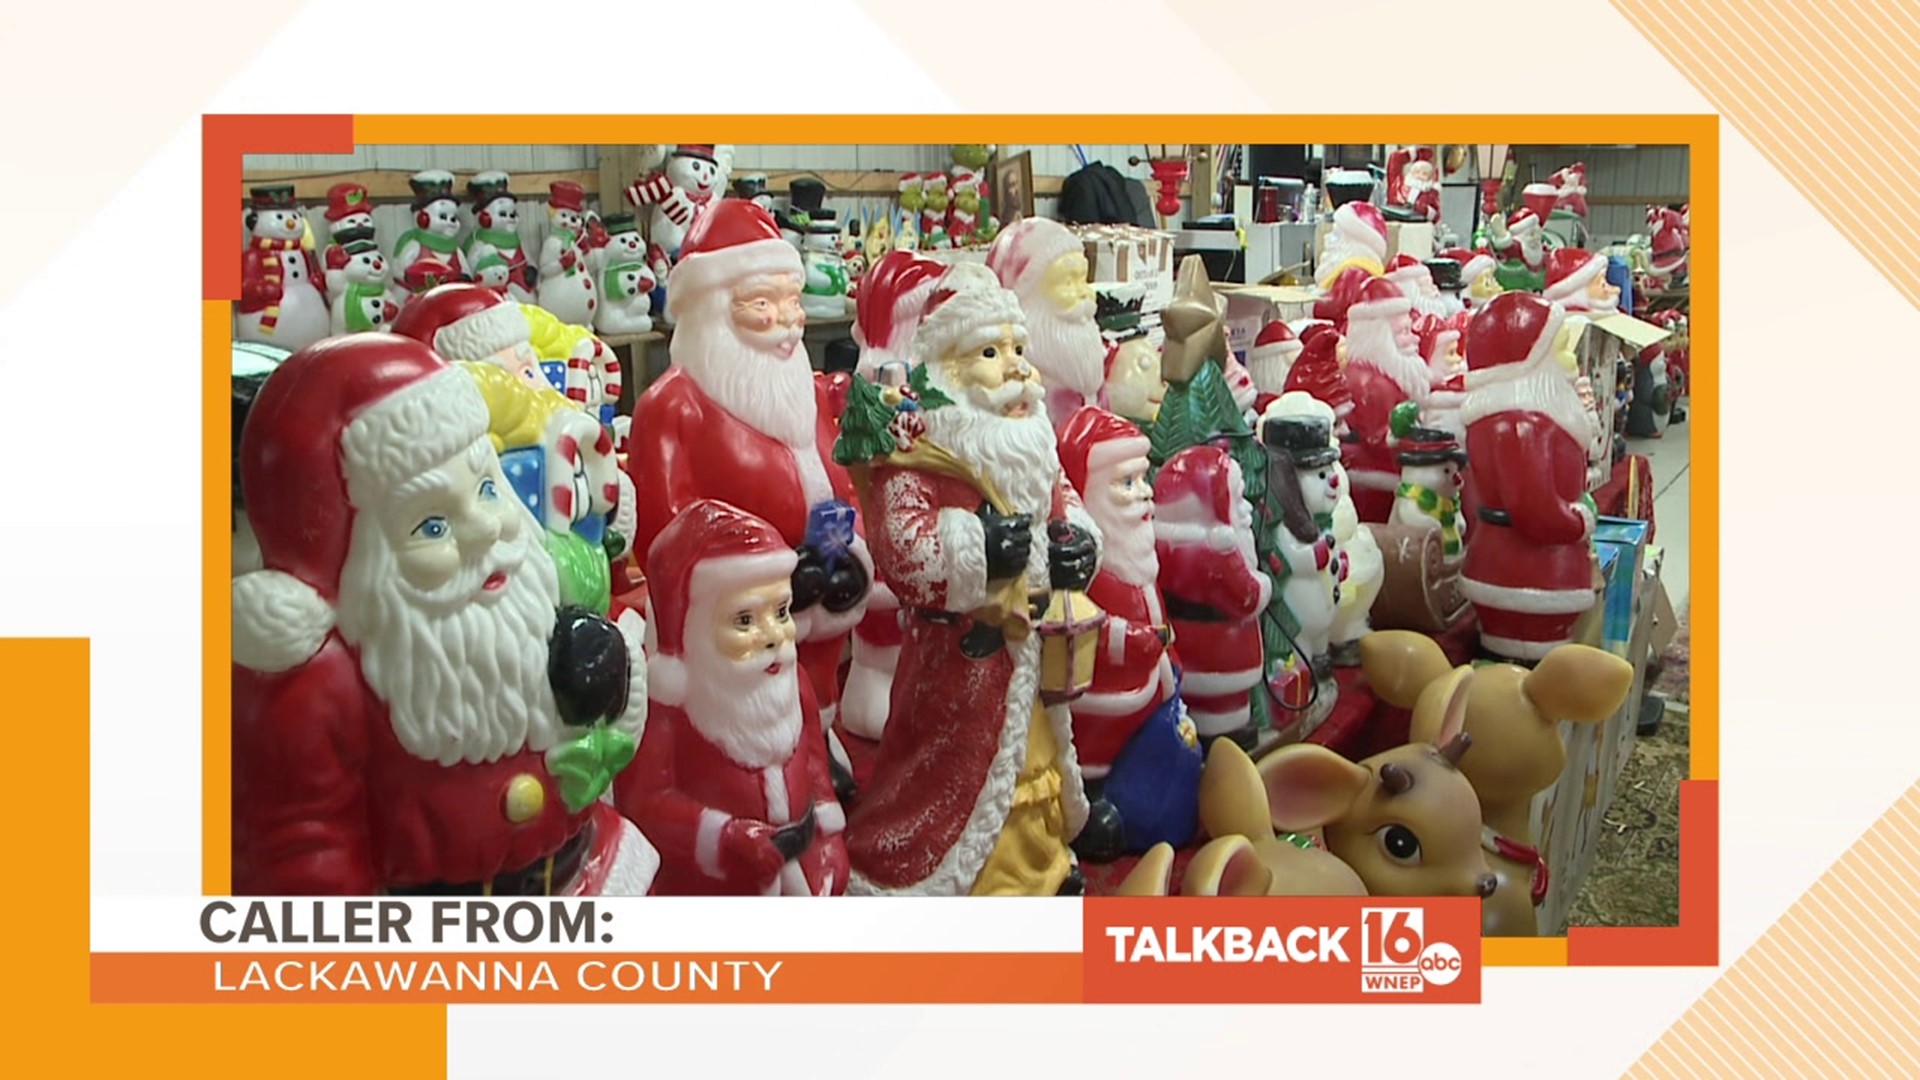 A caller from Lackawanna County is commenting on folks decorating for Christmas before Thanksgiving.